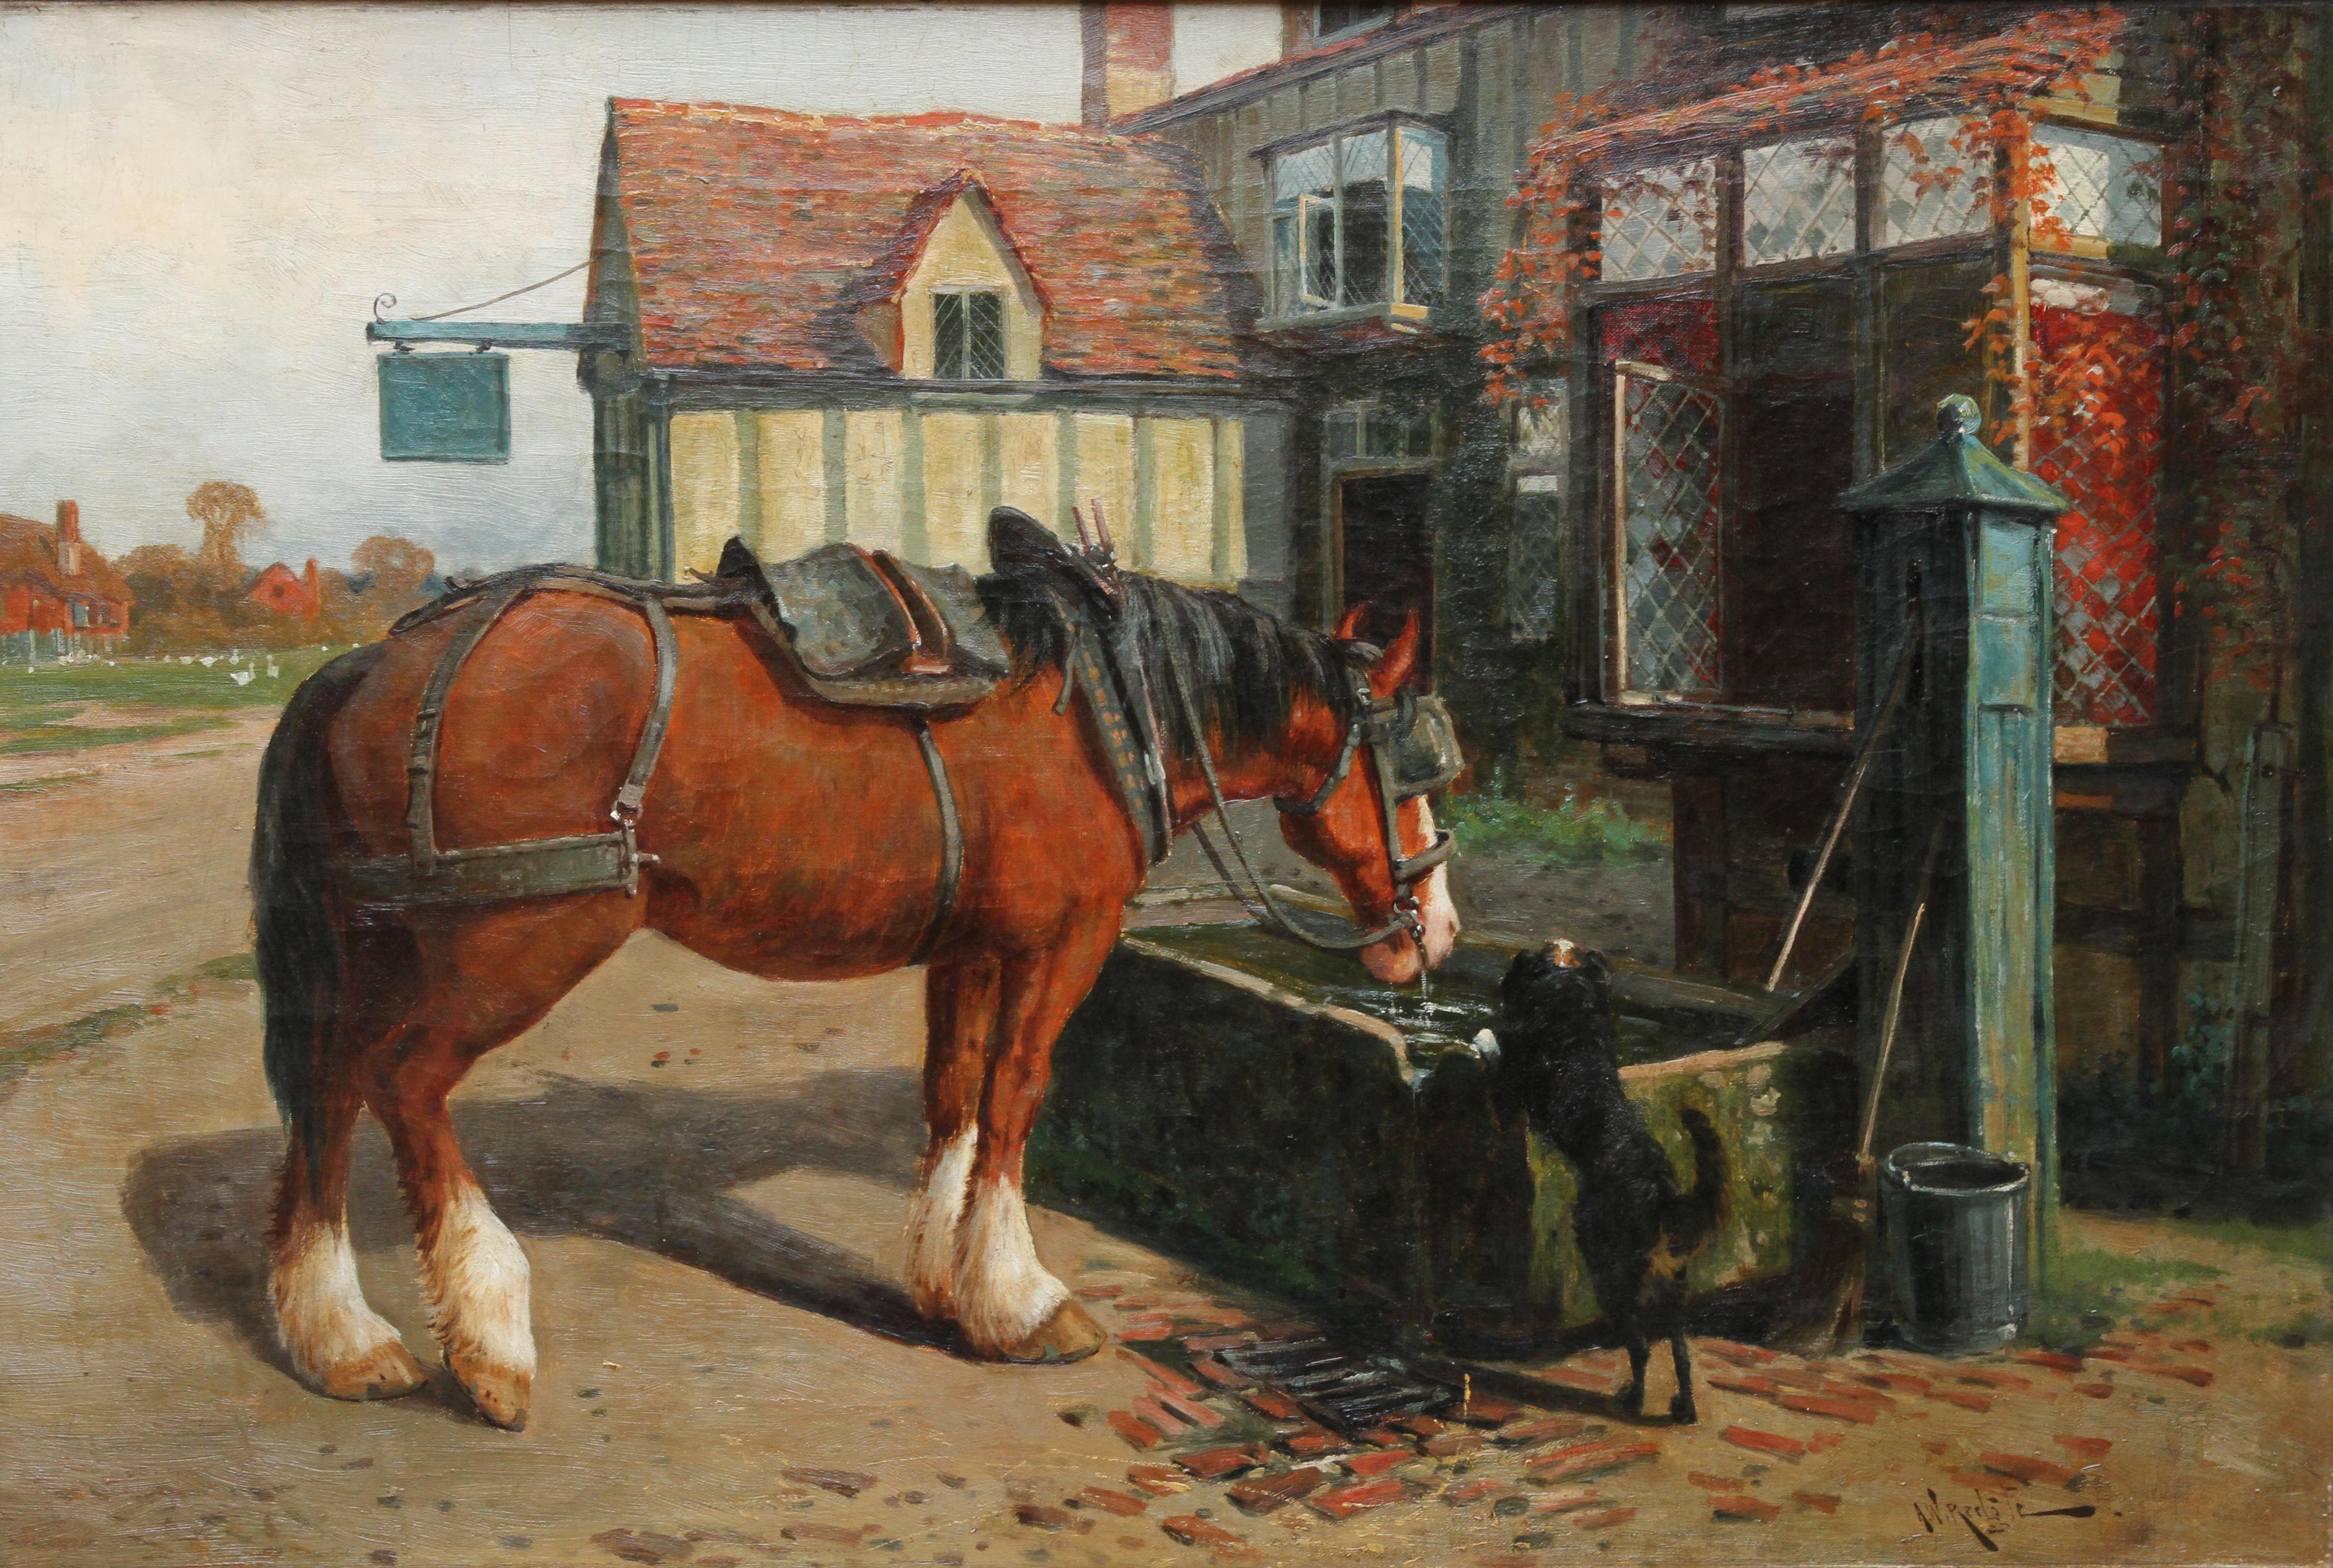 Farm Horse at Trough before a Tavern - British Victorian animal art oil painting - Painting by Arthur William Redgate